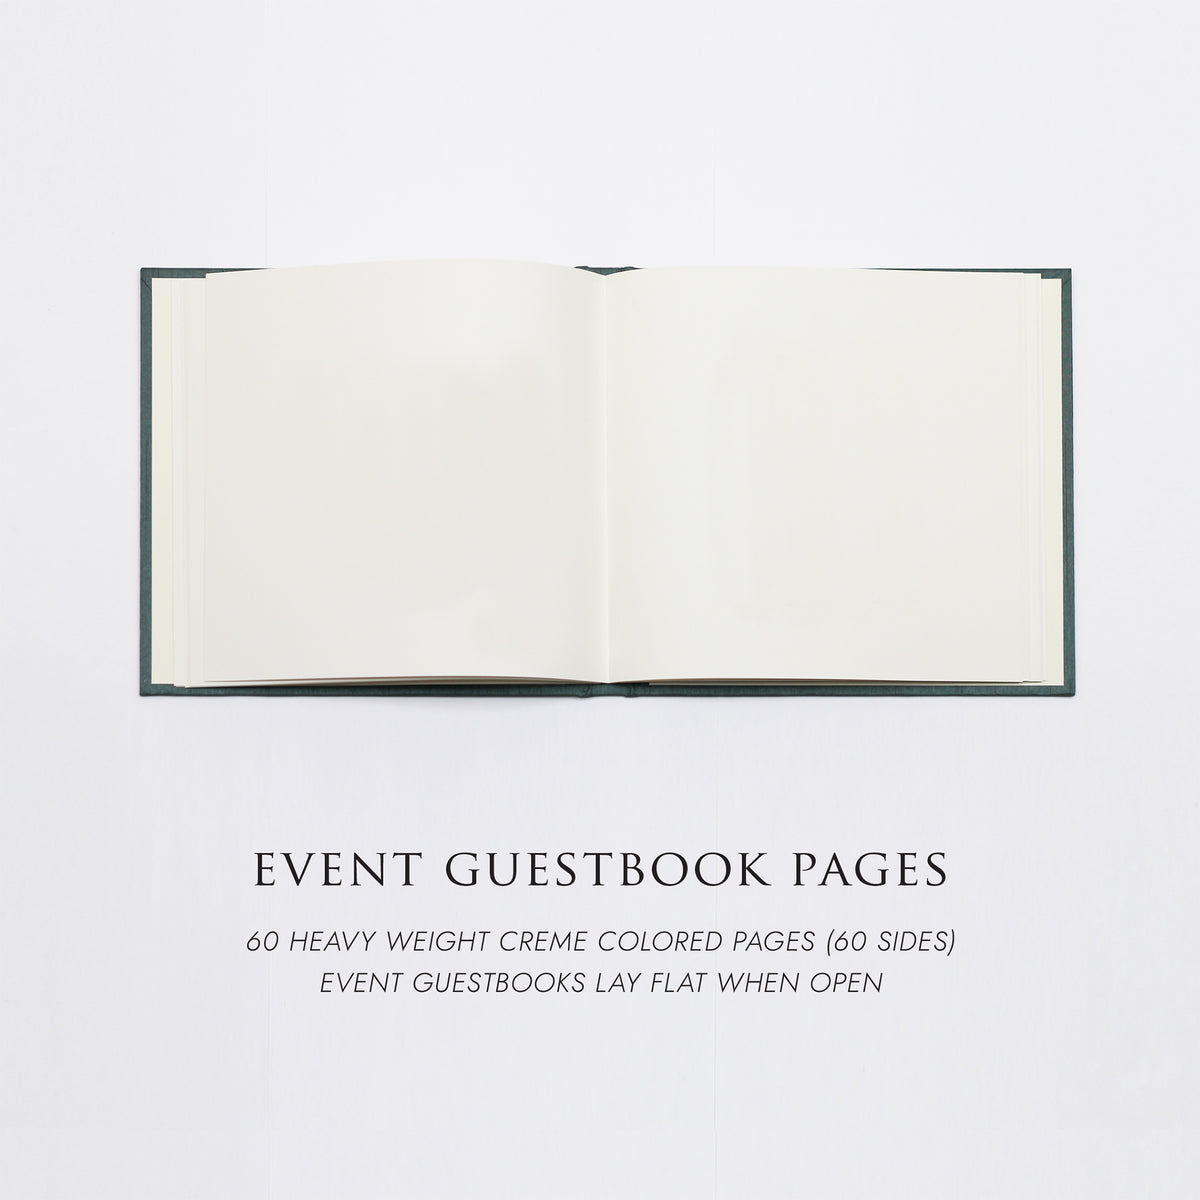 Event Guestbook Embossed with “Guests” | Cover: Dove Gray Cotton | Available Personalized